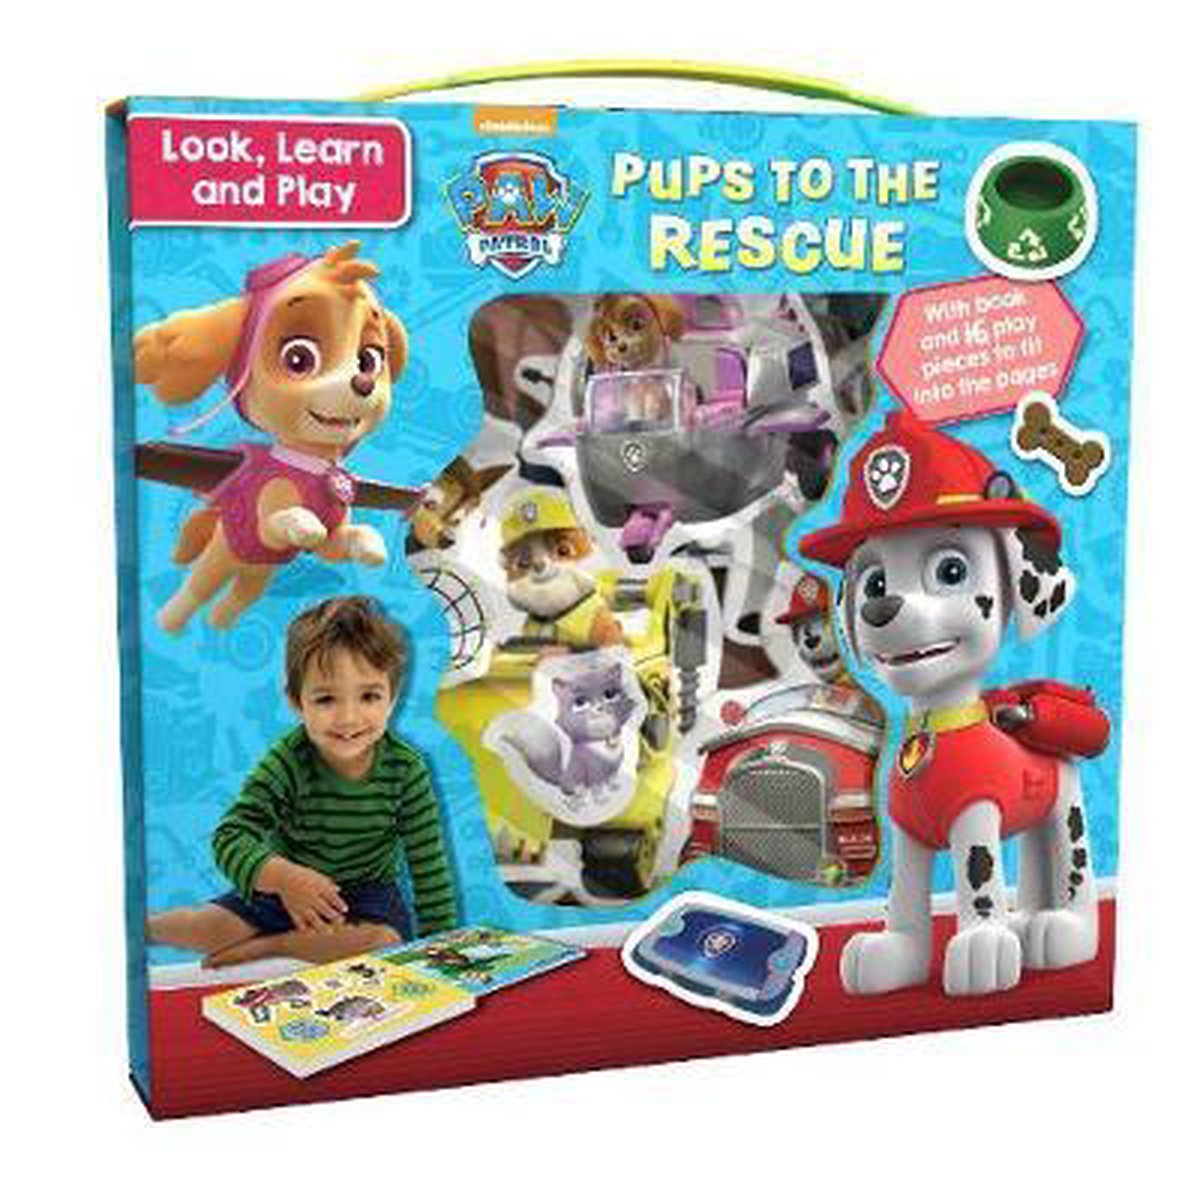 Nickelodeon PAW Patrol Look, Learn and Play main product image